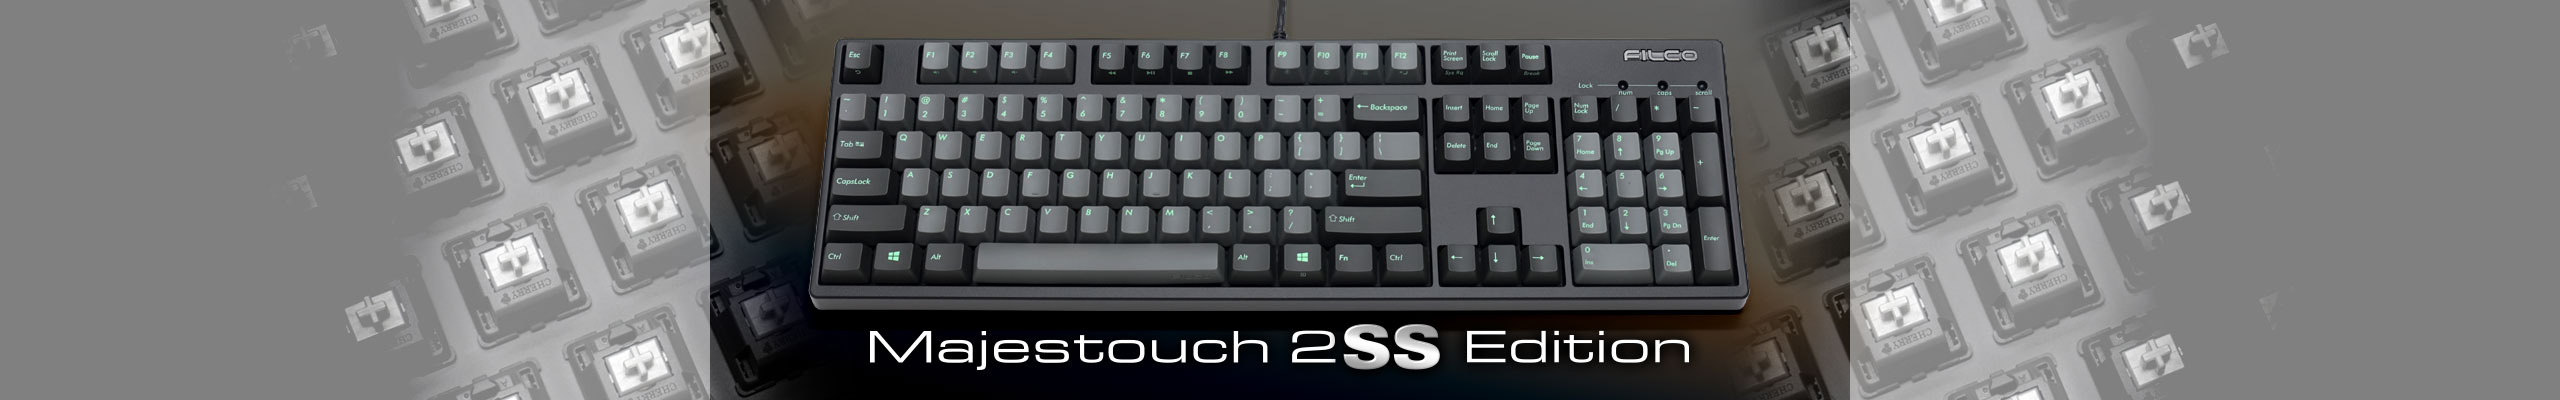 Majestouch 2SS Edition